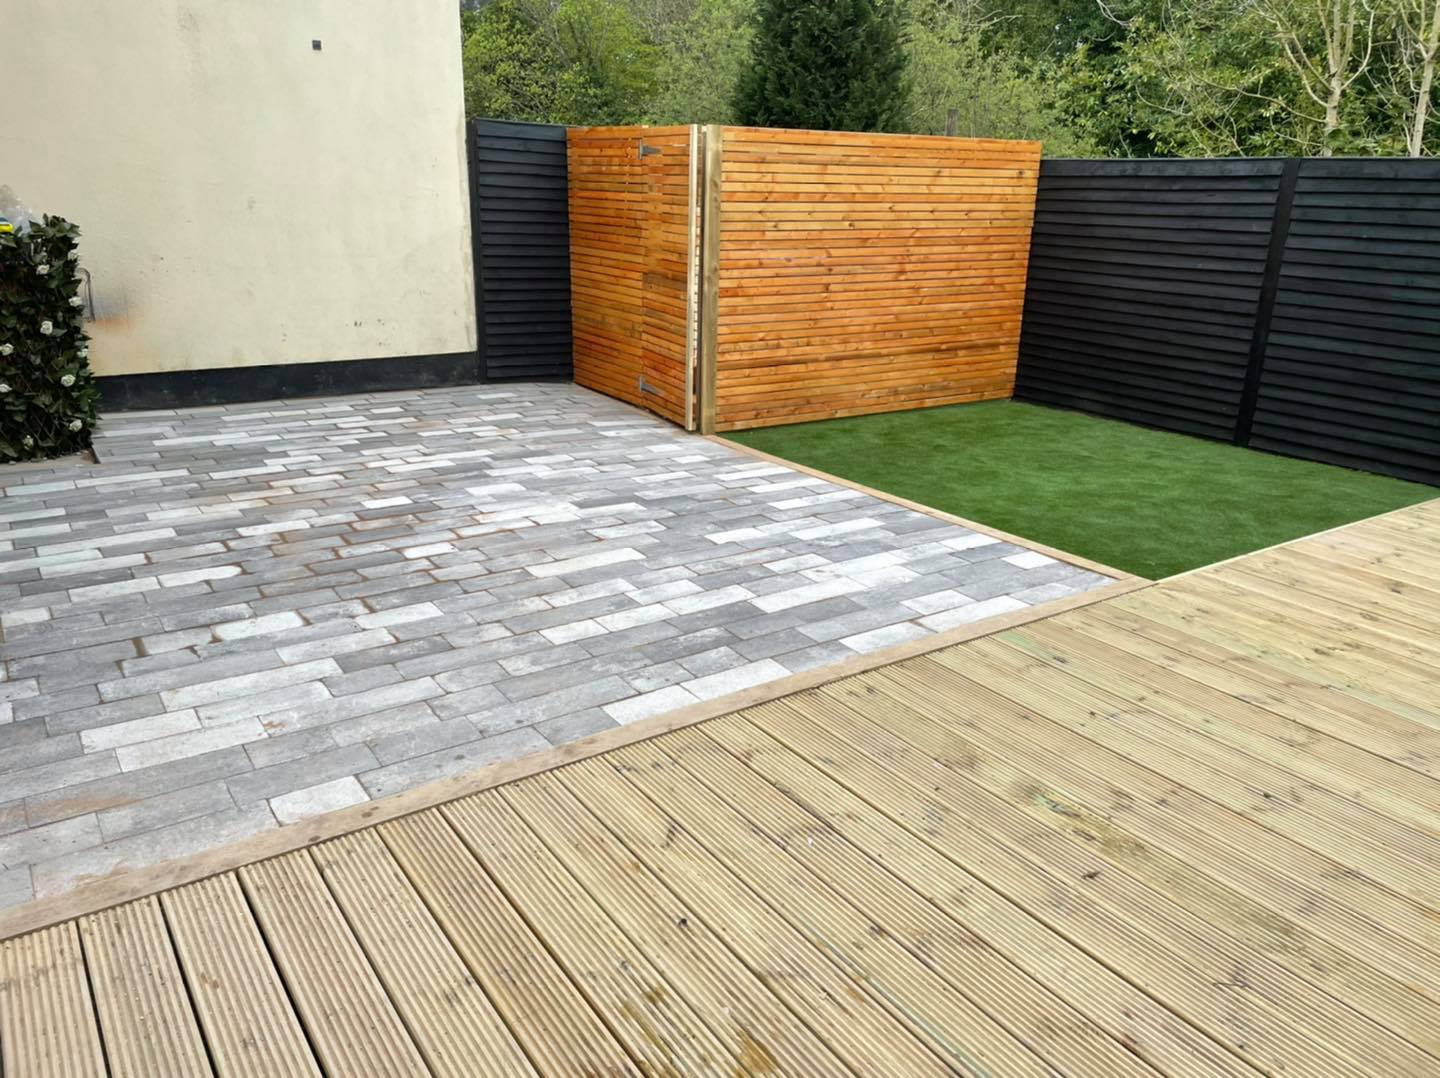 Garden with decking, paving and artificial grass